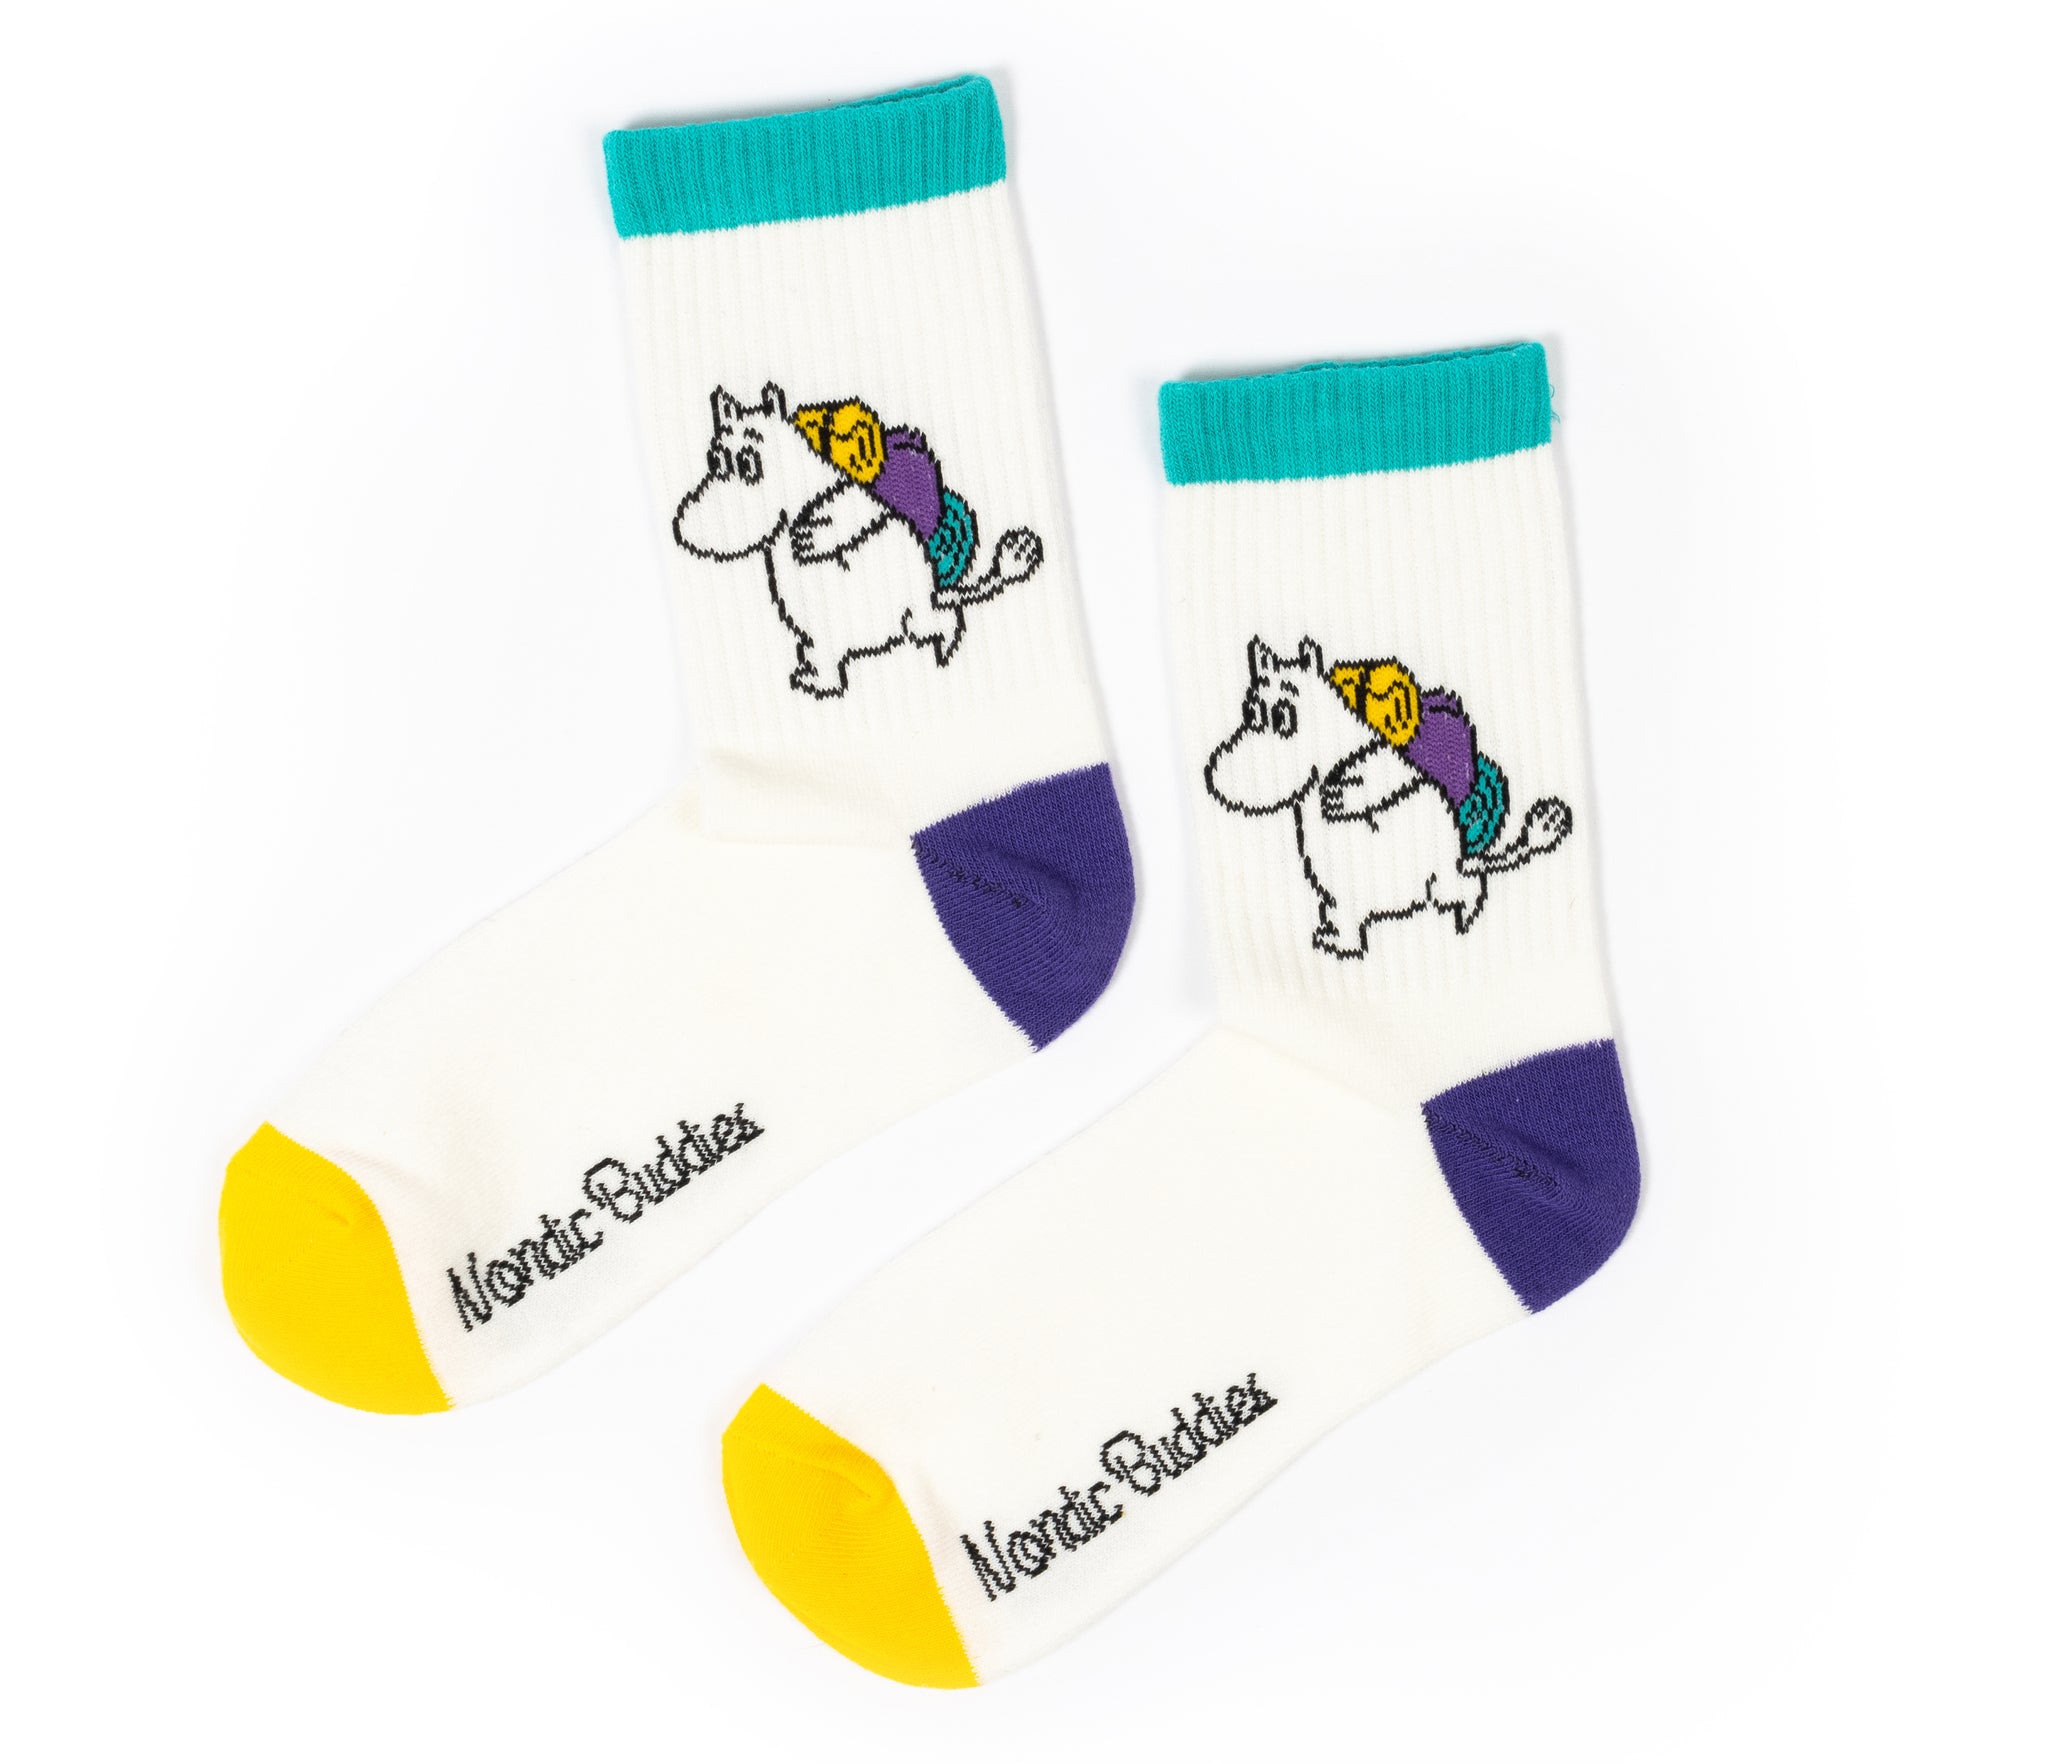 Little My Biodegradeable Iphone Case - Nordicbuddies - The Official Moomin  Shop